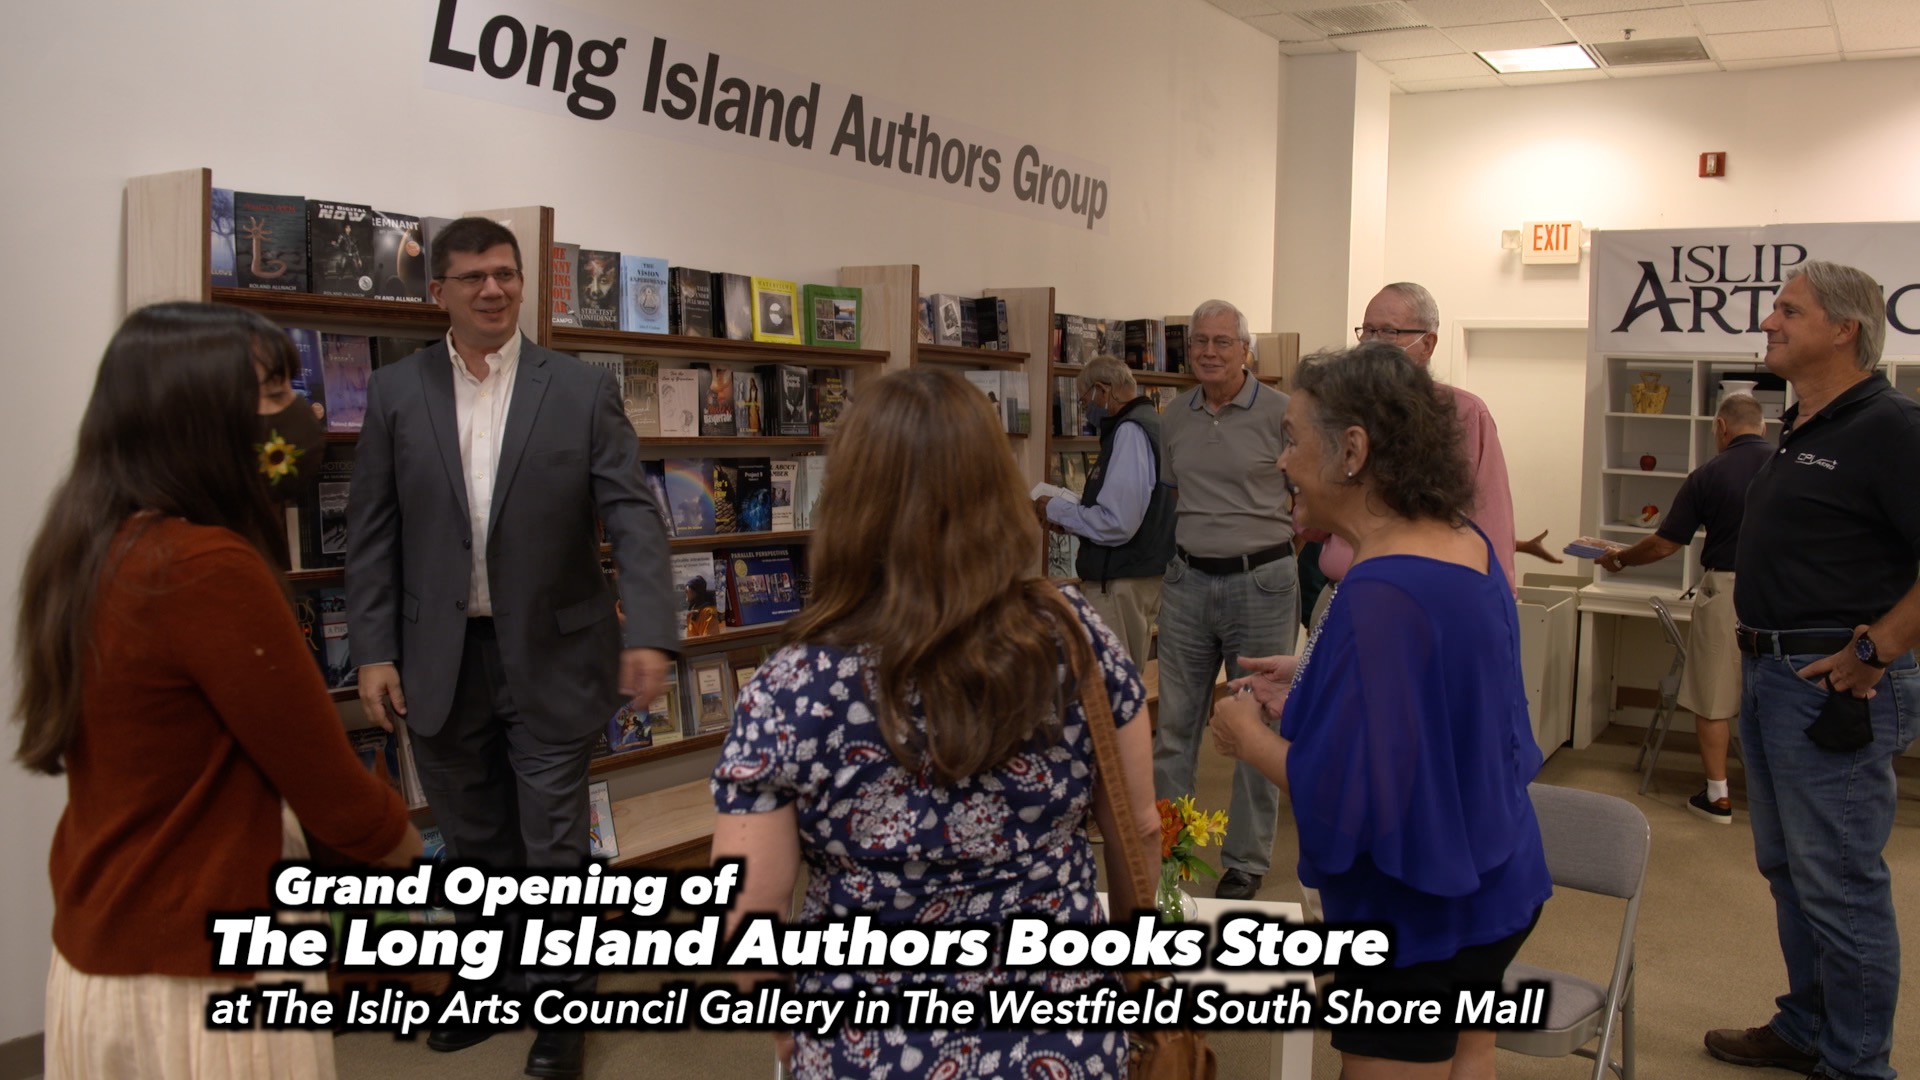 Grand Opening of The Long Island Authors Books Store at The Islip Arts Council Gallery